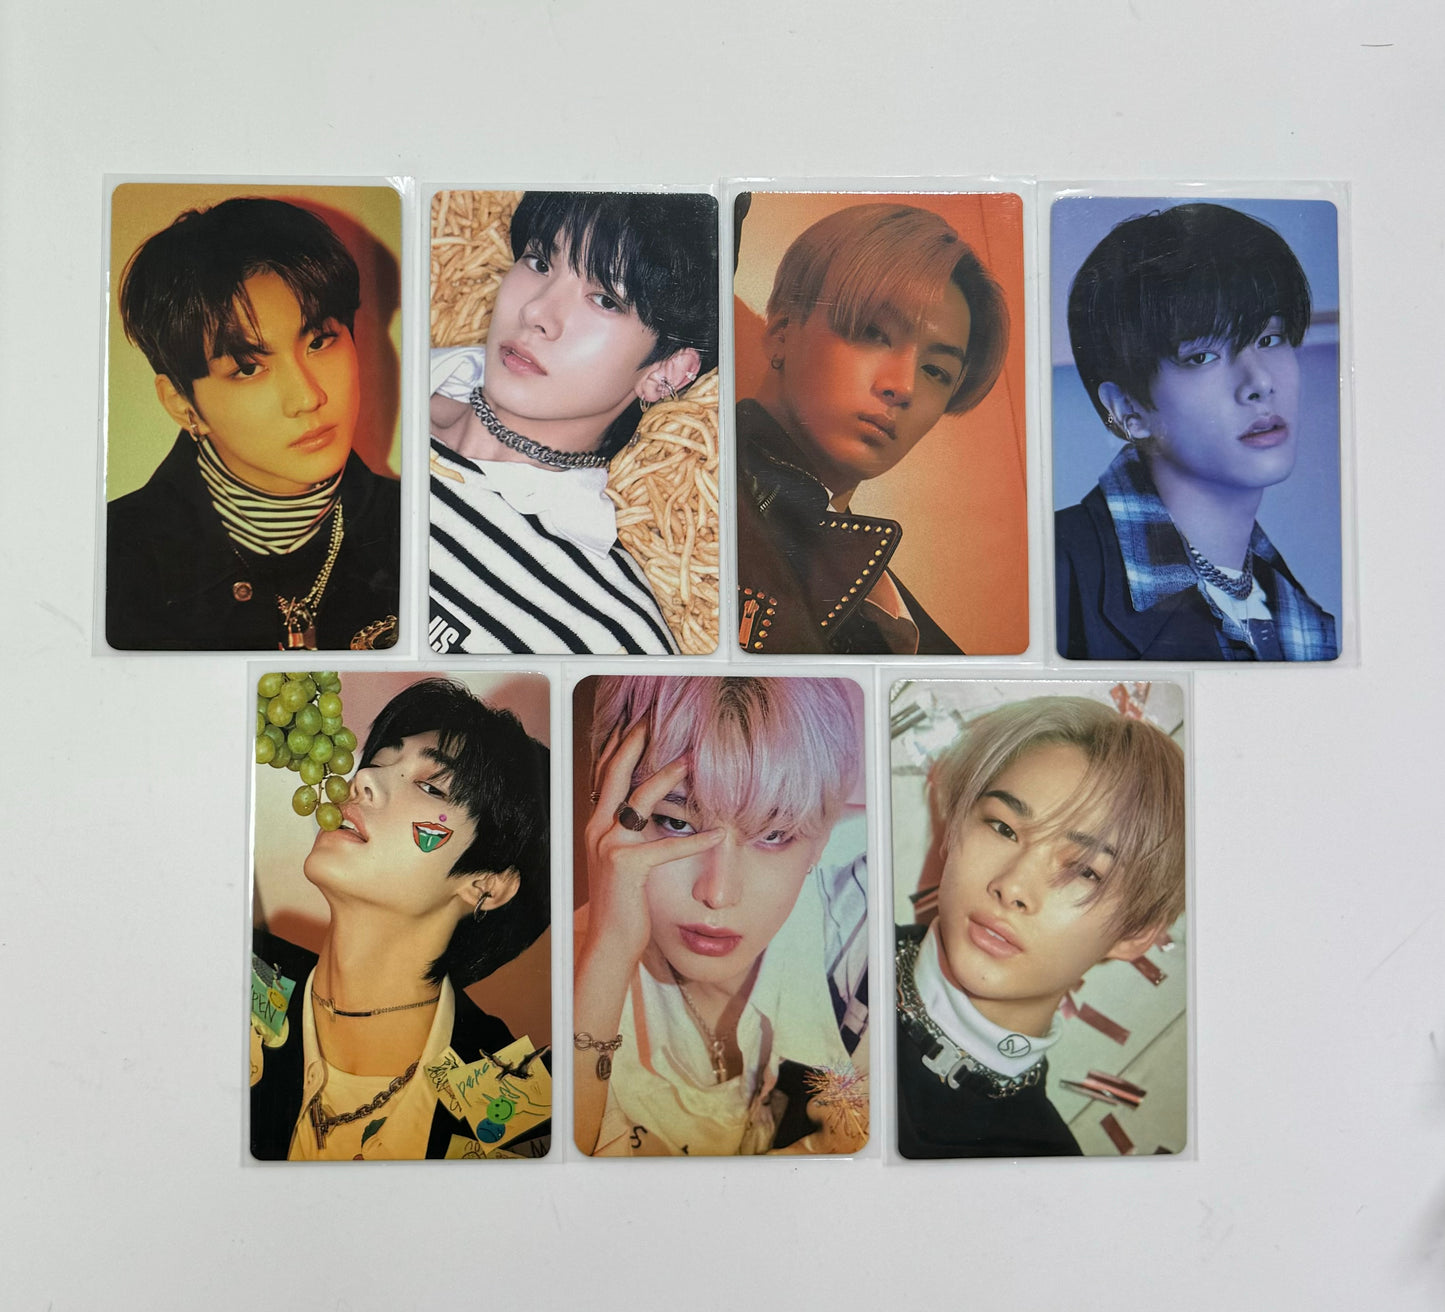 [LUCKY DRAW EVENT] [ENHYPEN] Border : Carnival : Fansign POB Photocard